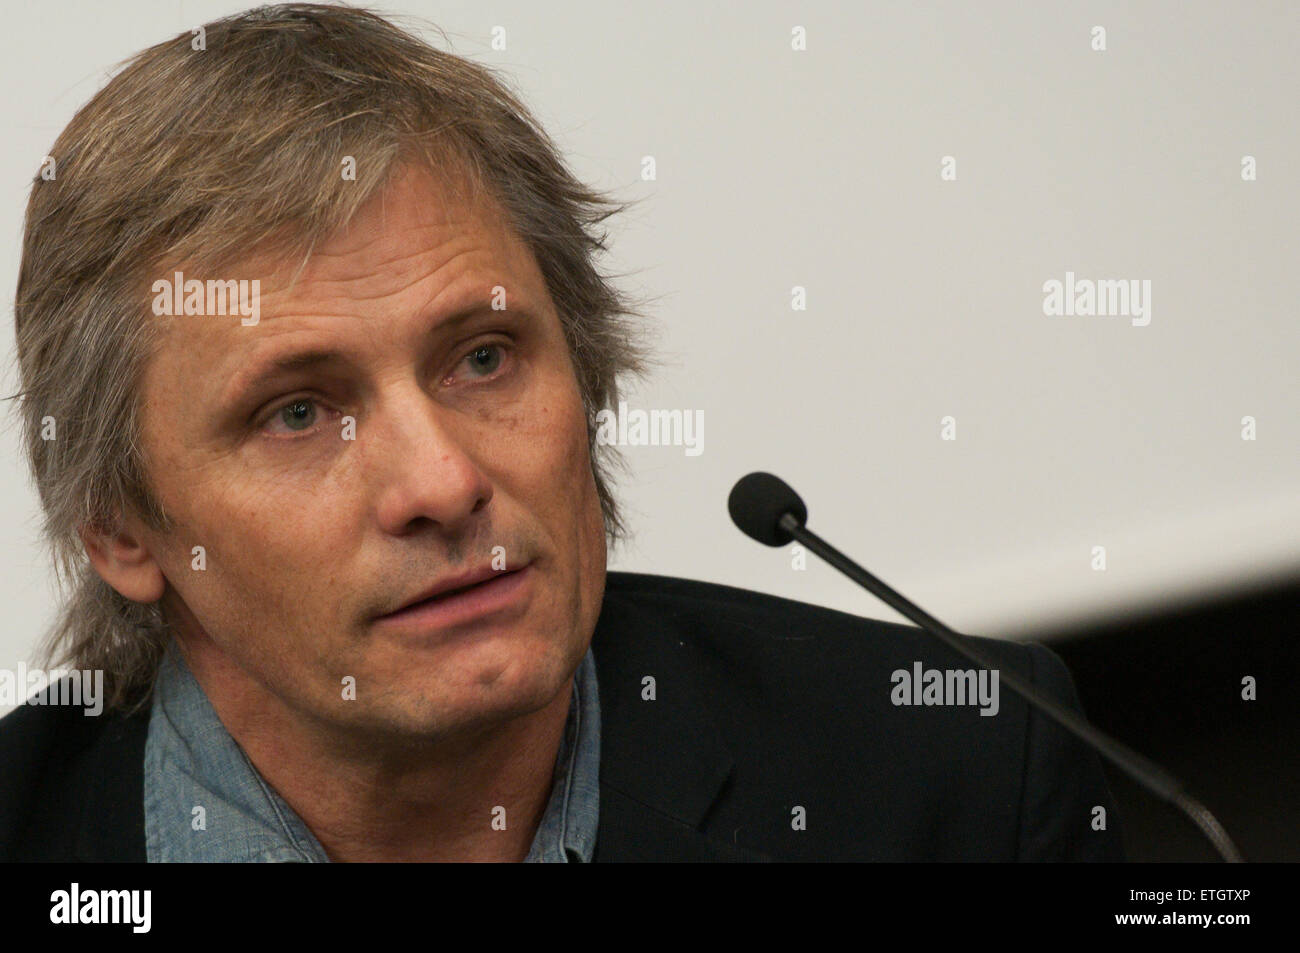 Viggo Mortensen attends the presentation for the book 'Sons of the Forest' in Barcelona. The book by Bossert and Villar, which gathers a collection of the photographic work of German ethnographer Max Schmidt about the South American Indians, has been published by Mortensen  Featuring: Viggo Mortensen Where: Barcelona, Spain When: 19 Feb 2015 Credit: David R.Rico/WENN.com Stock Photo